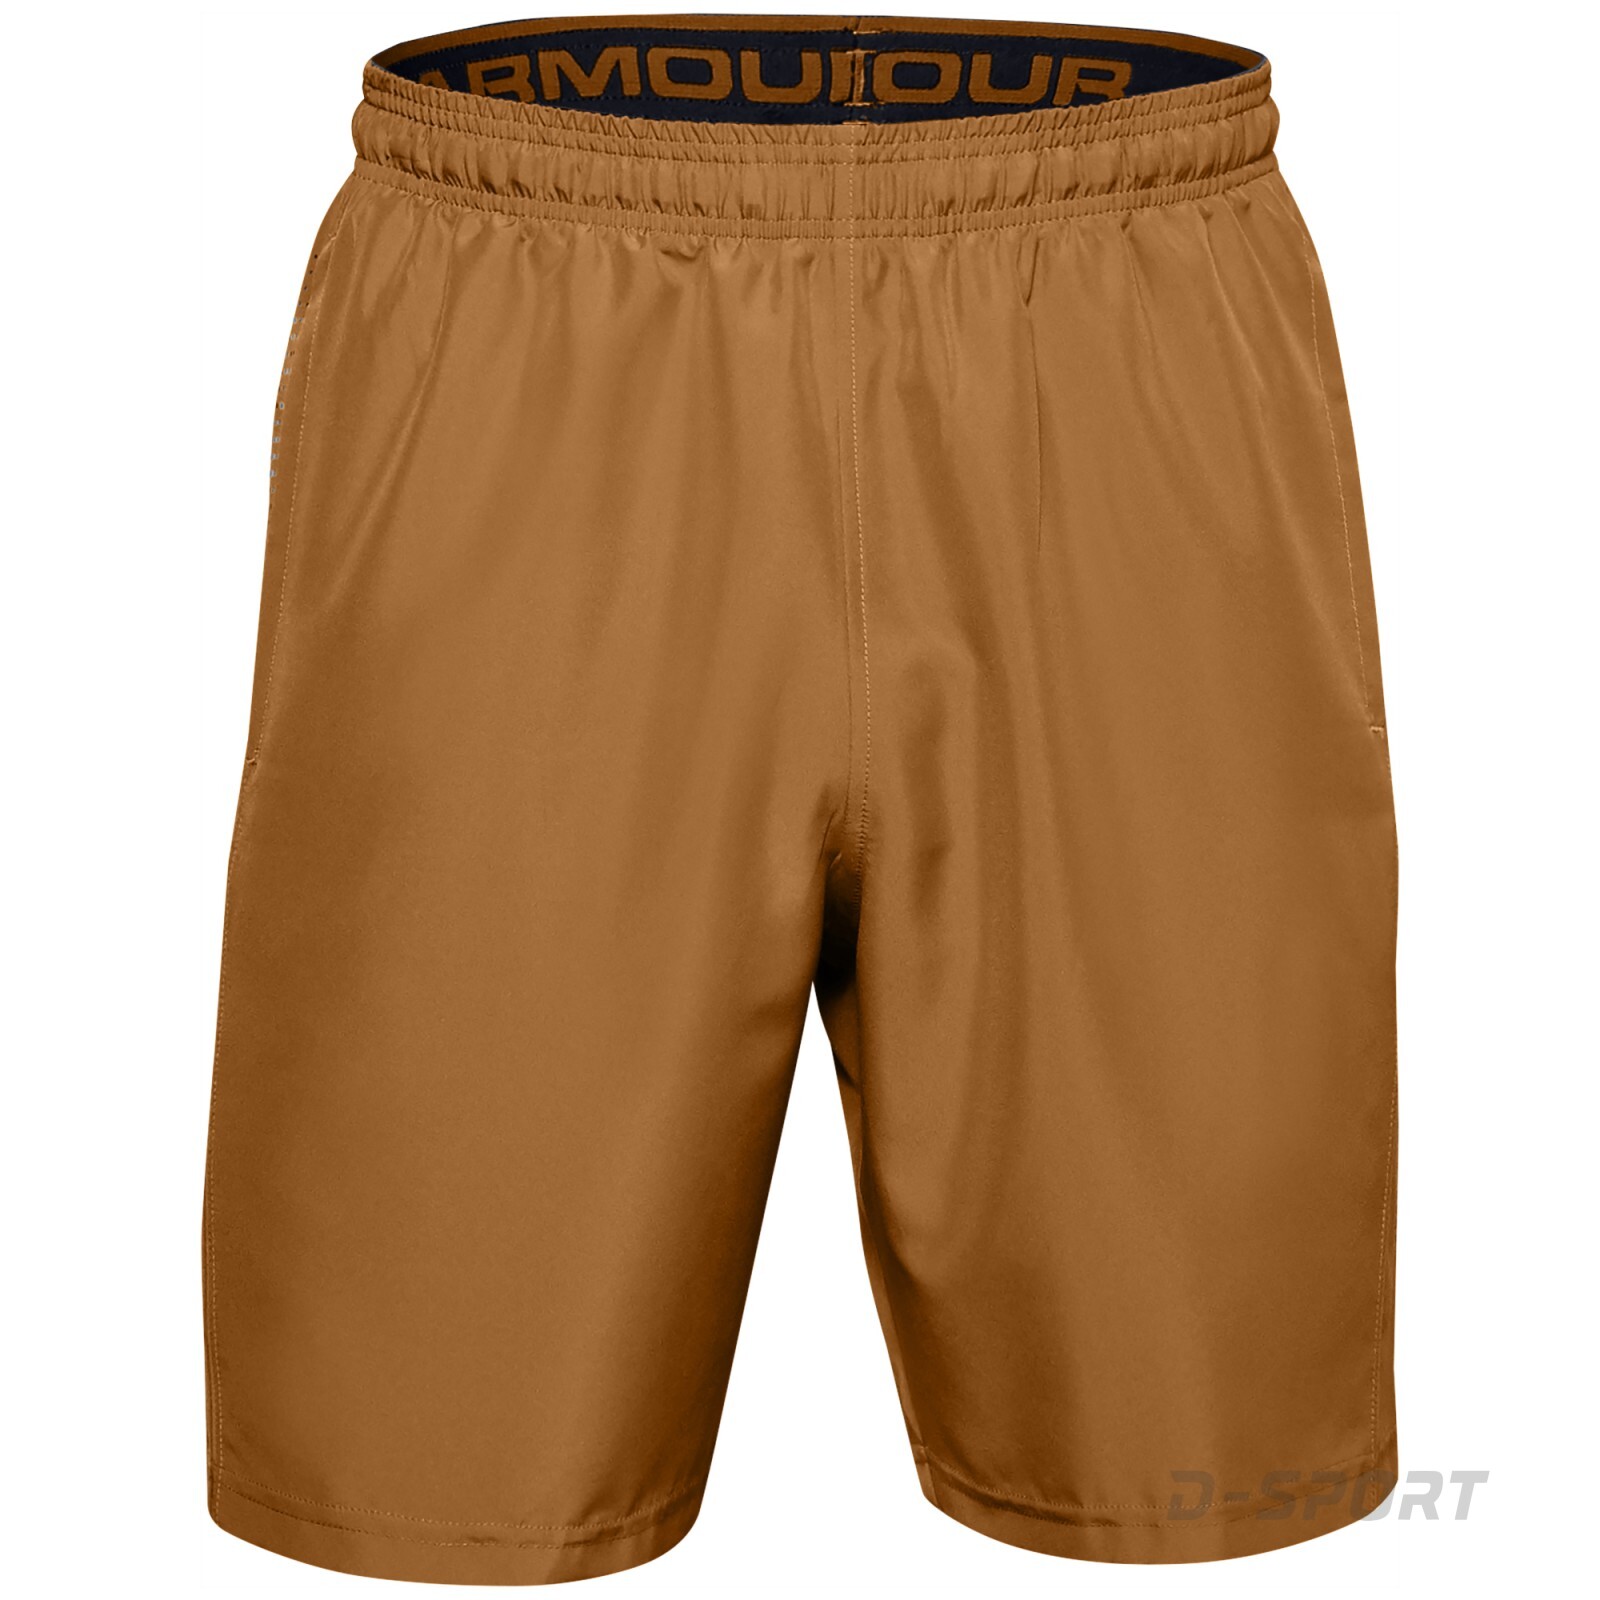 Under Armour UA Woven Graphic Shorts-YLW